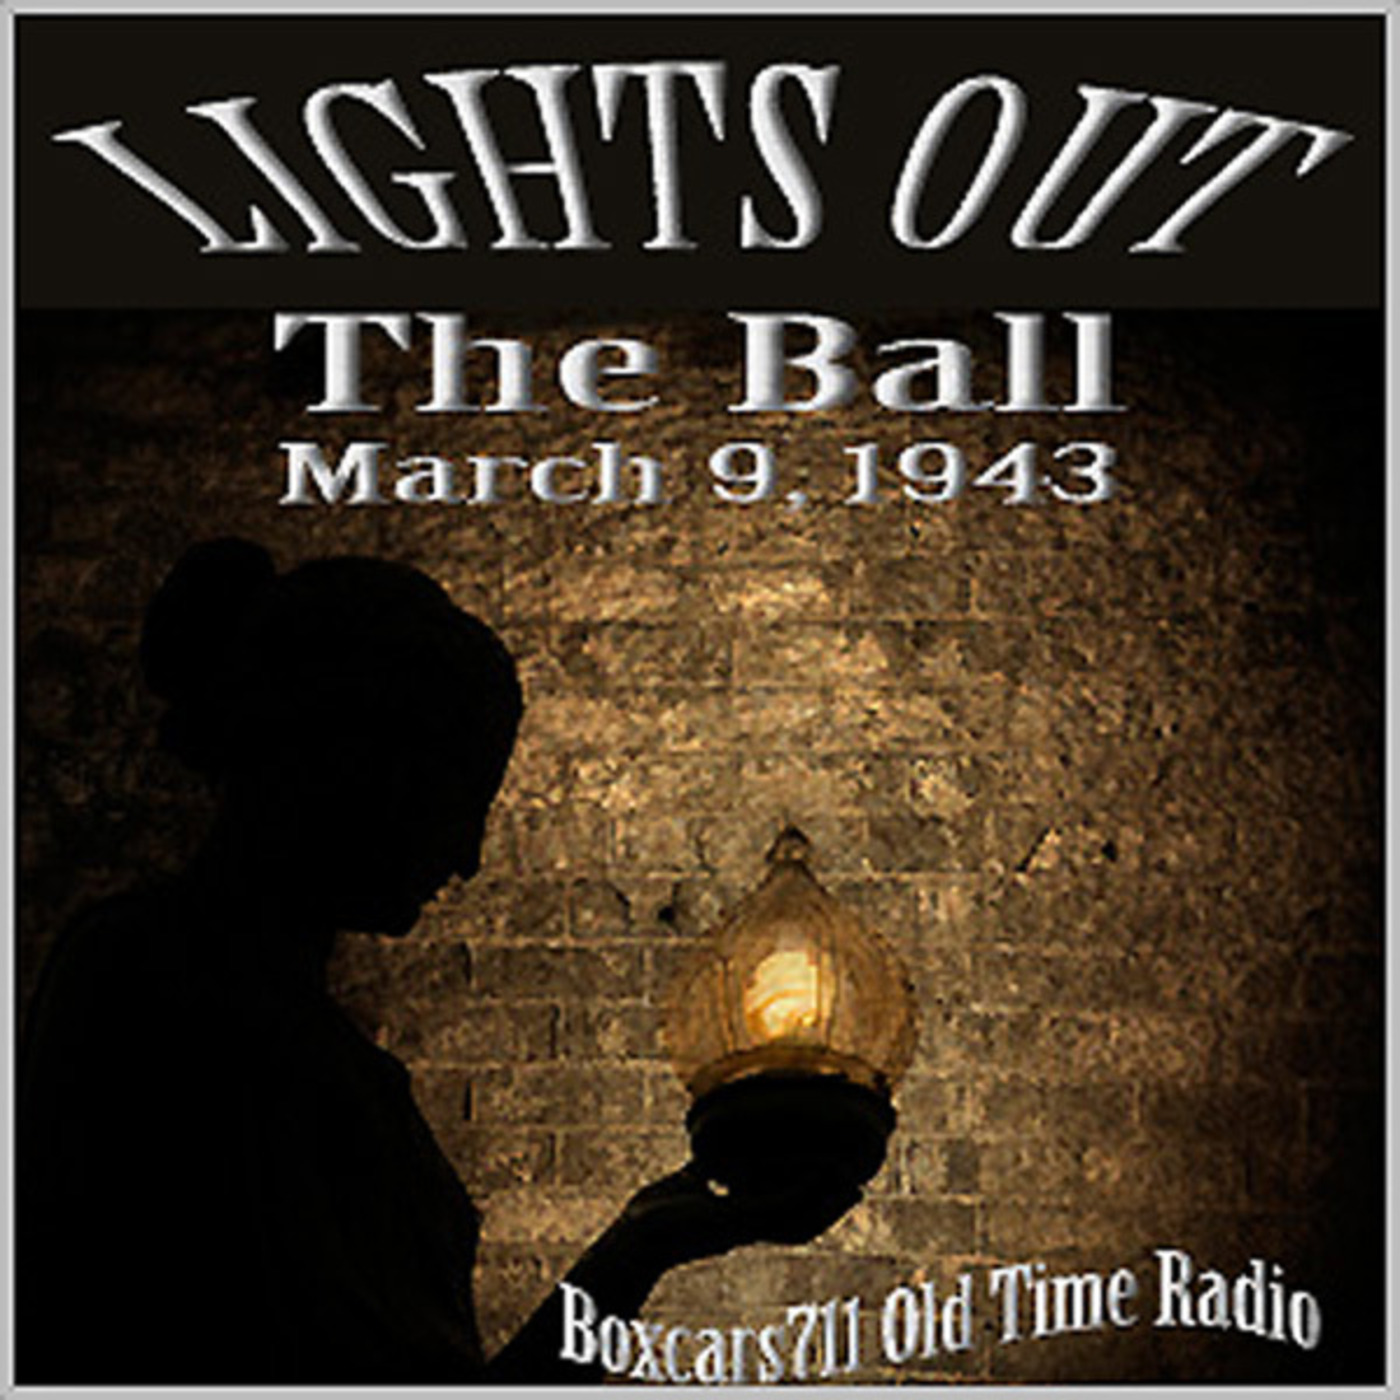 Episode 9638: Lights Out - 